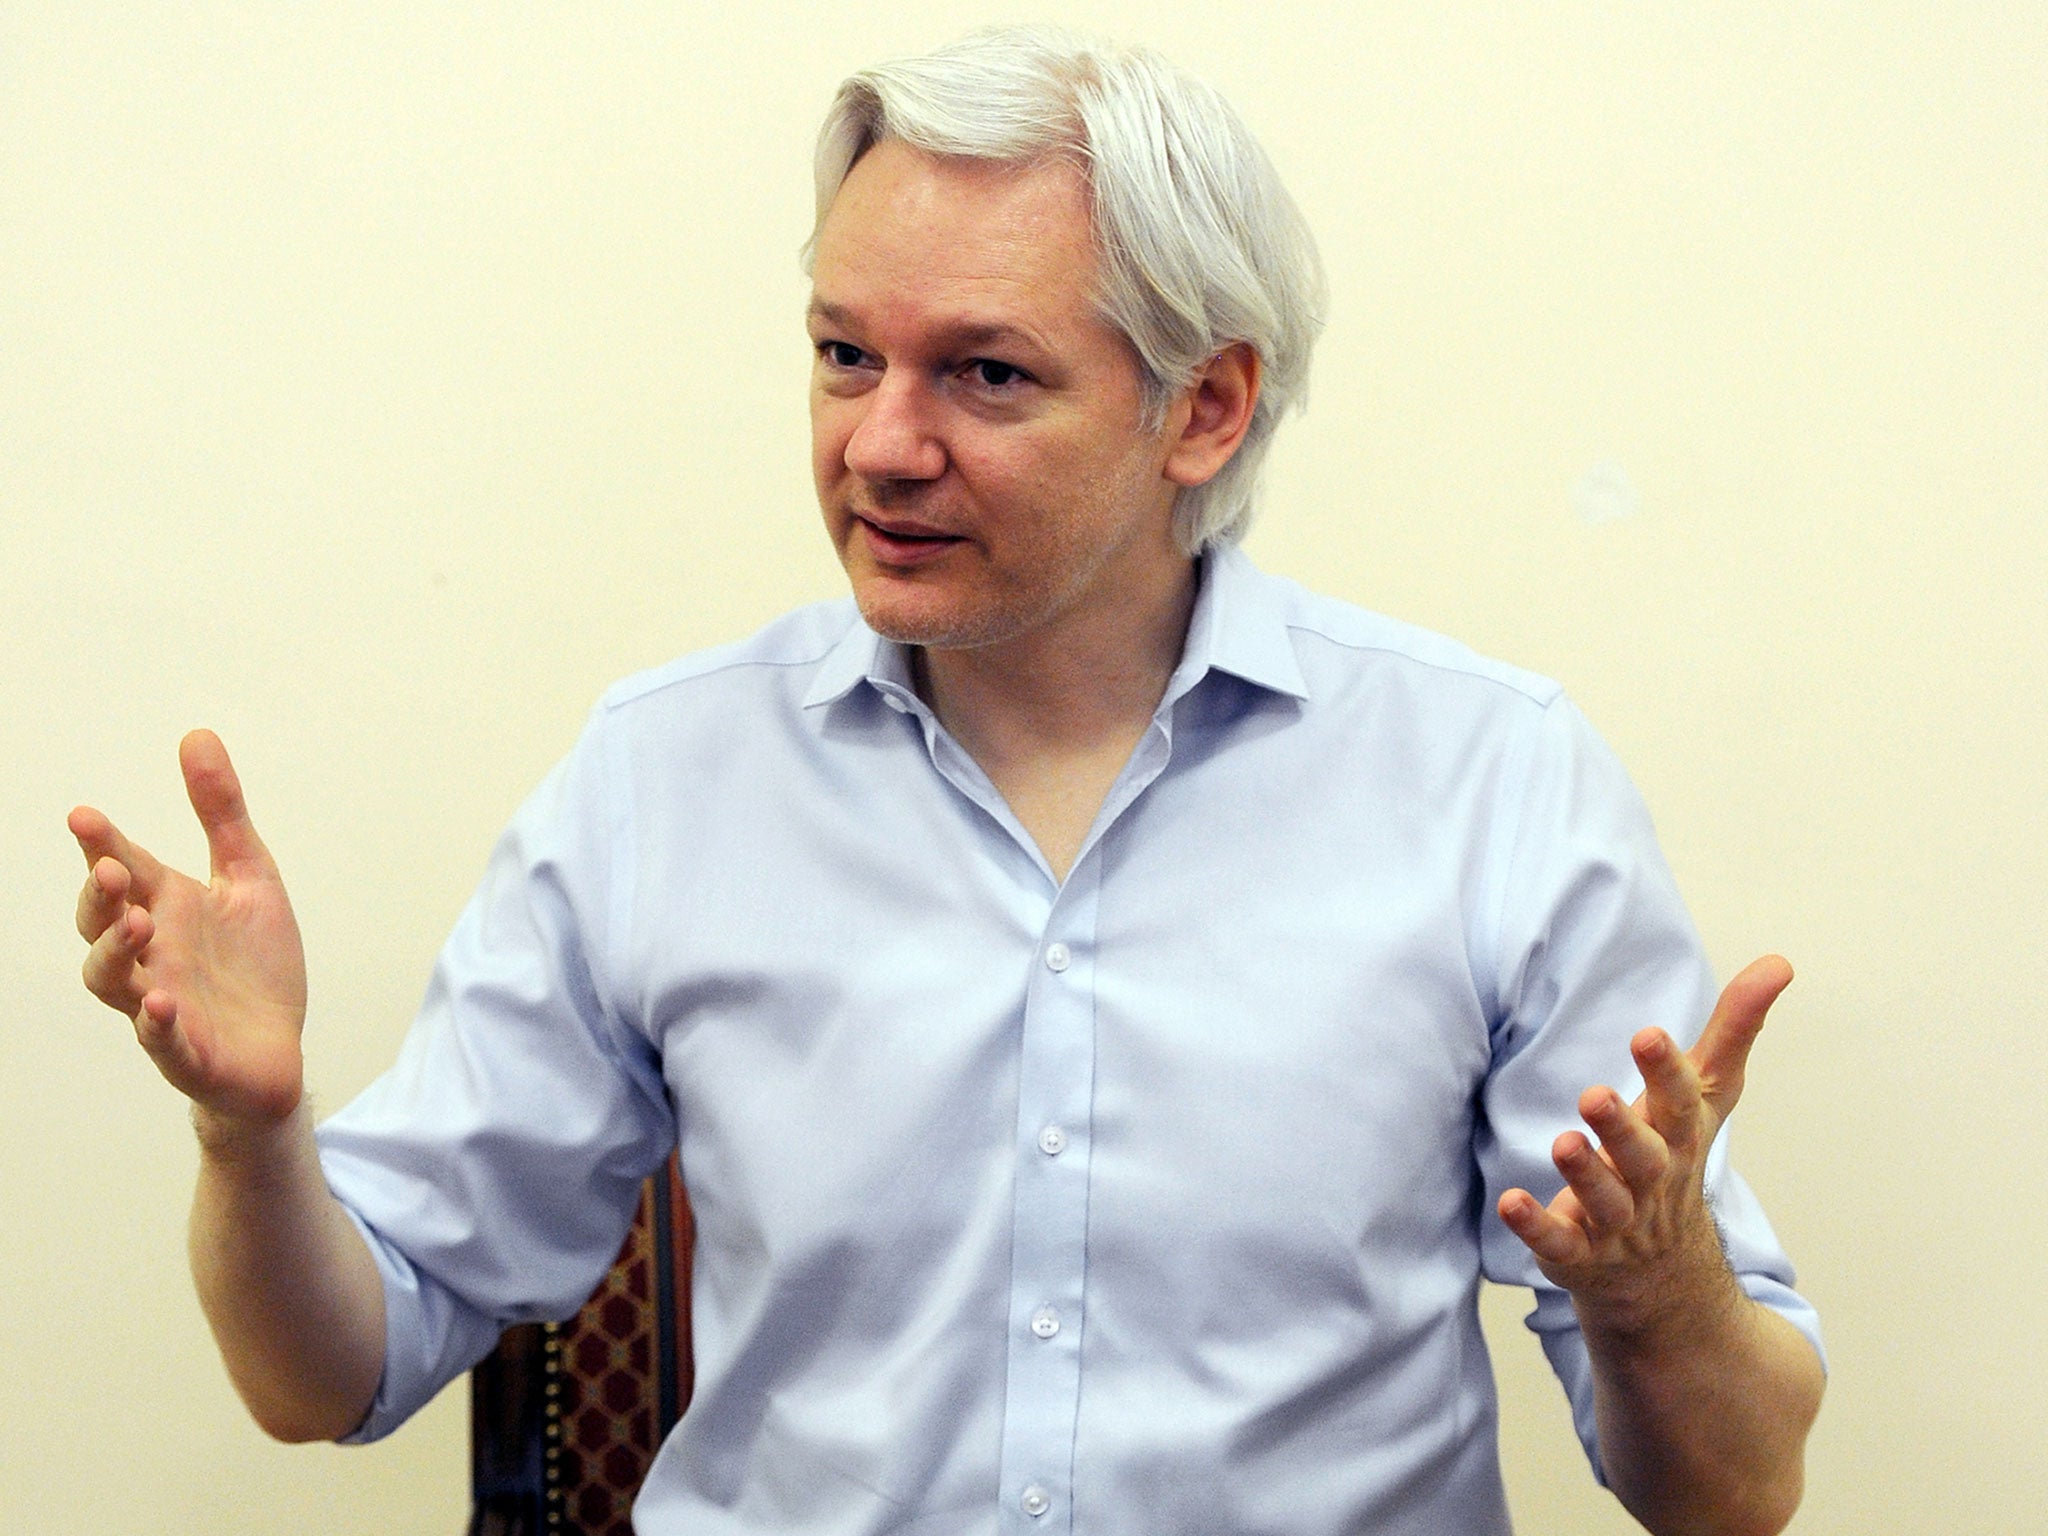 Wikileaks founder Julian Assange speaks to the media inside the Ecuadorian Embassy in London on 14 June, 2013, ahead of the first anniversary of his arrival there on 19 June, 2012